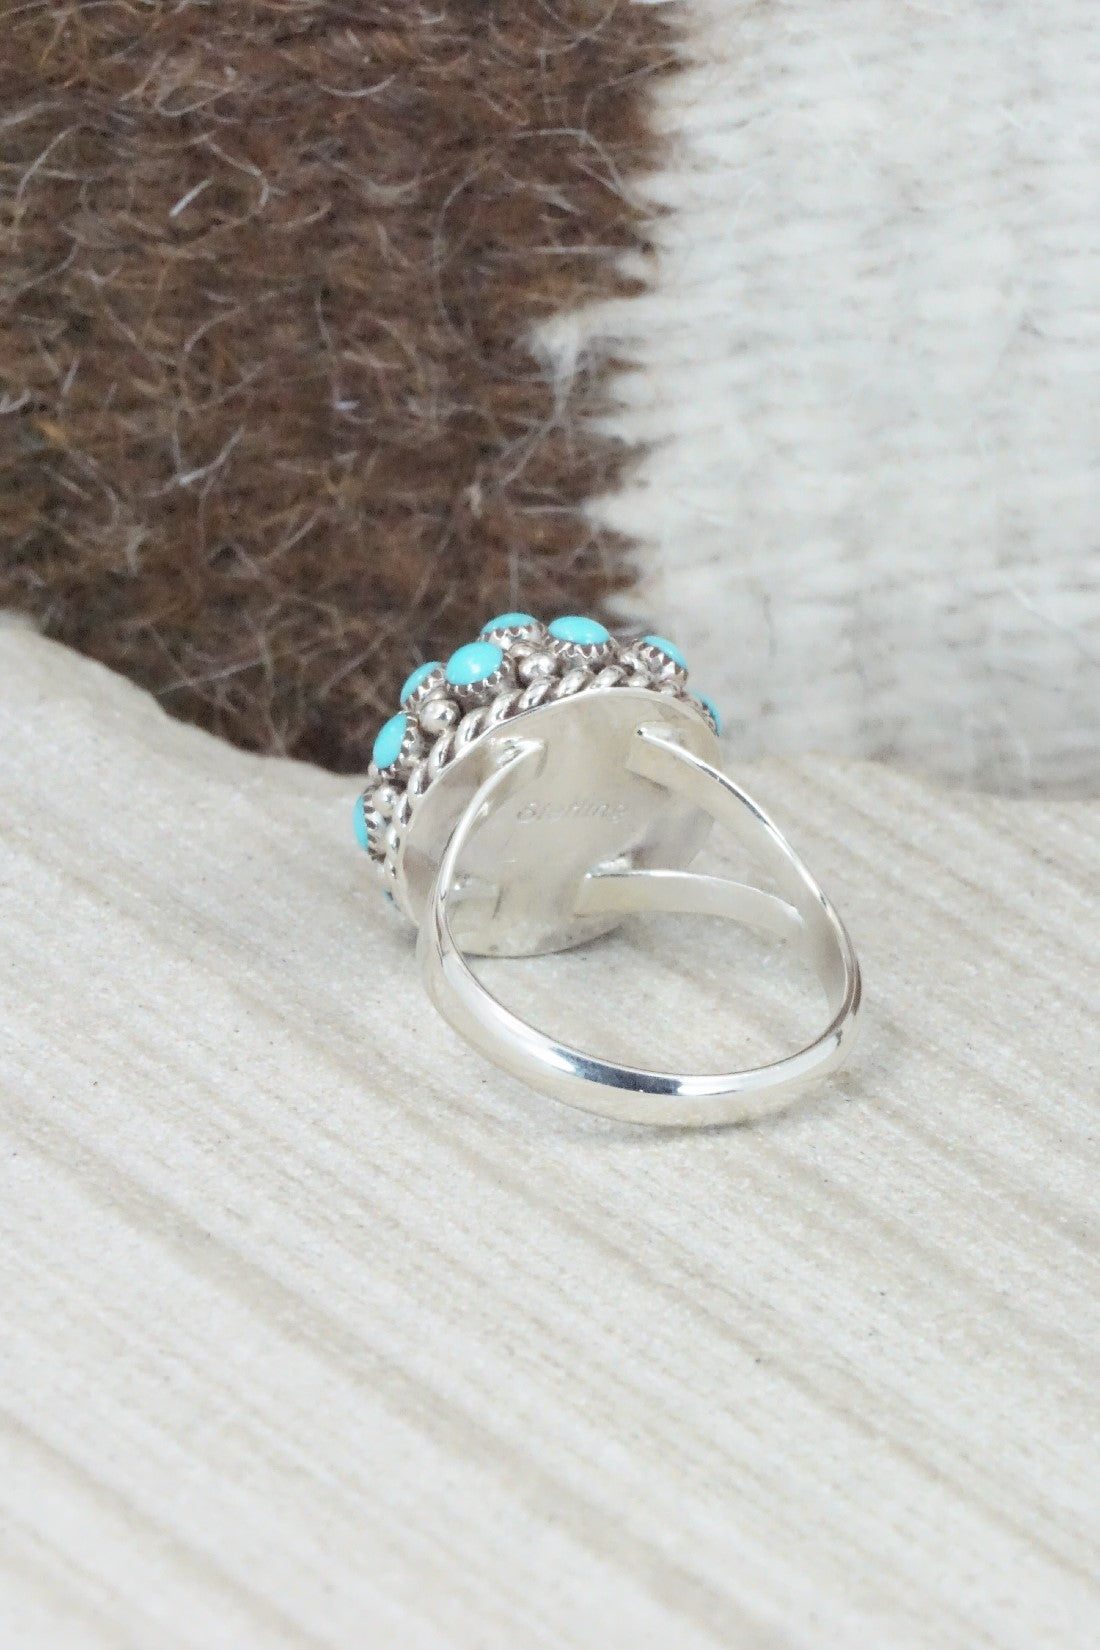 Turquoise & Sterling Silver Ring - Dickie Charlie - Size 7